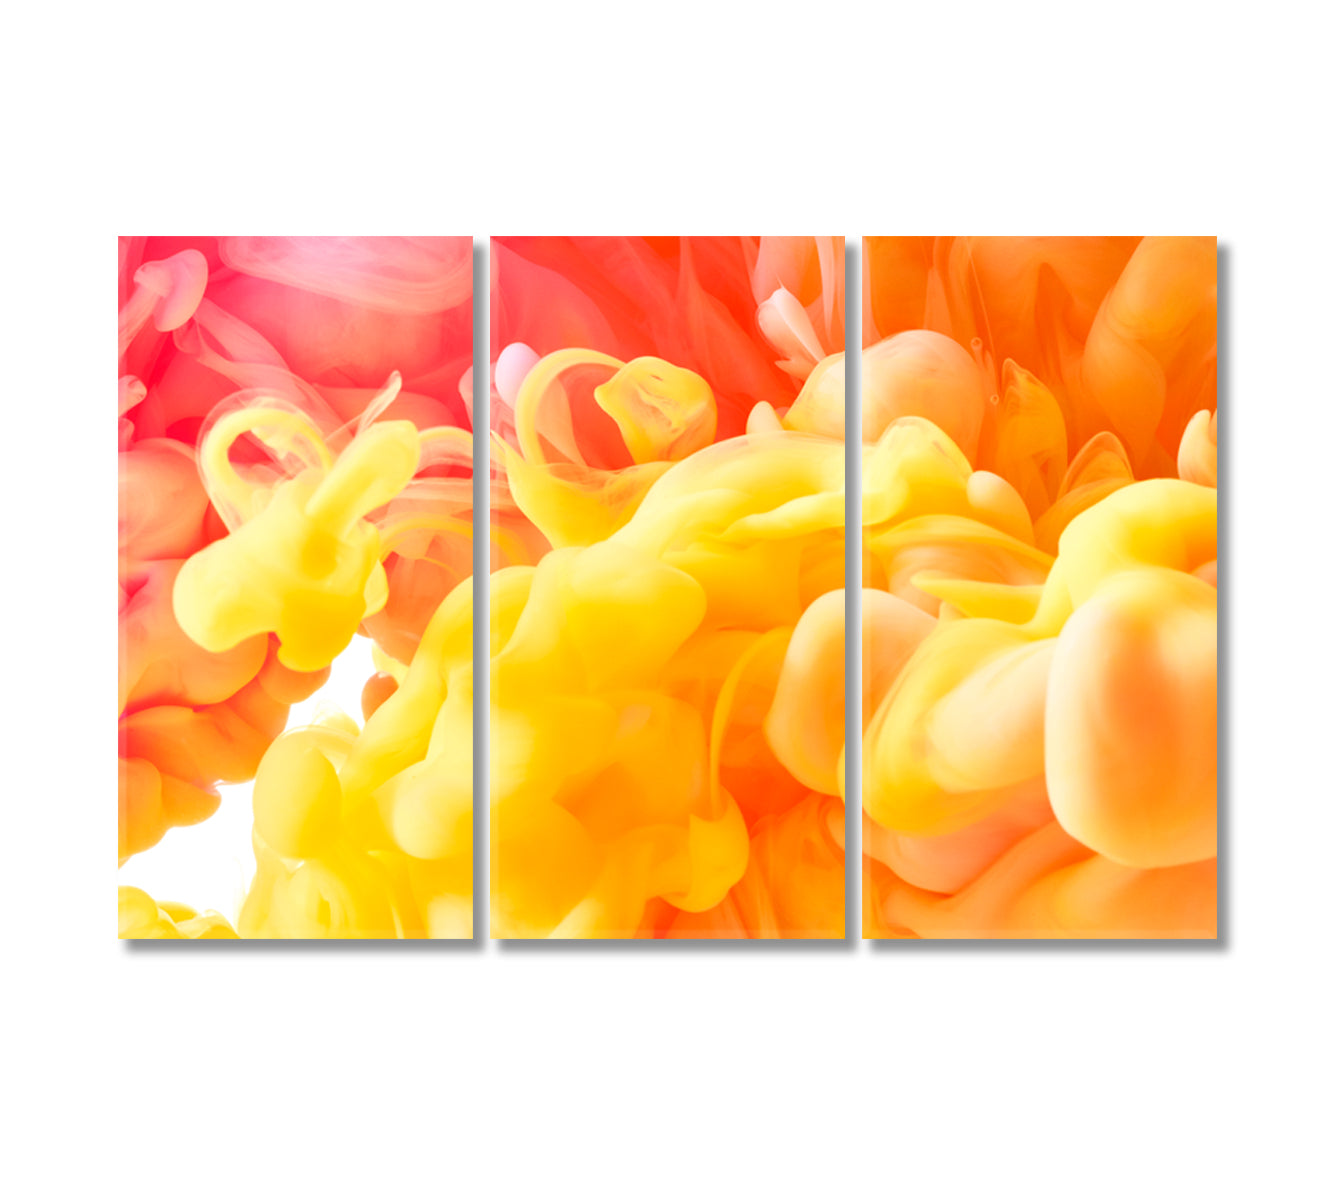 Bright Yellow and Orange Ink Drops in Water Canvas Print-Canvas Print-CetArt-3 Panels-36x24 inches-CetArt